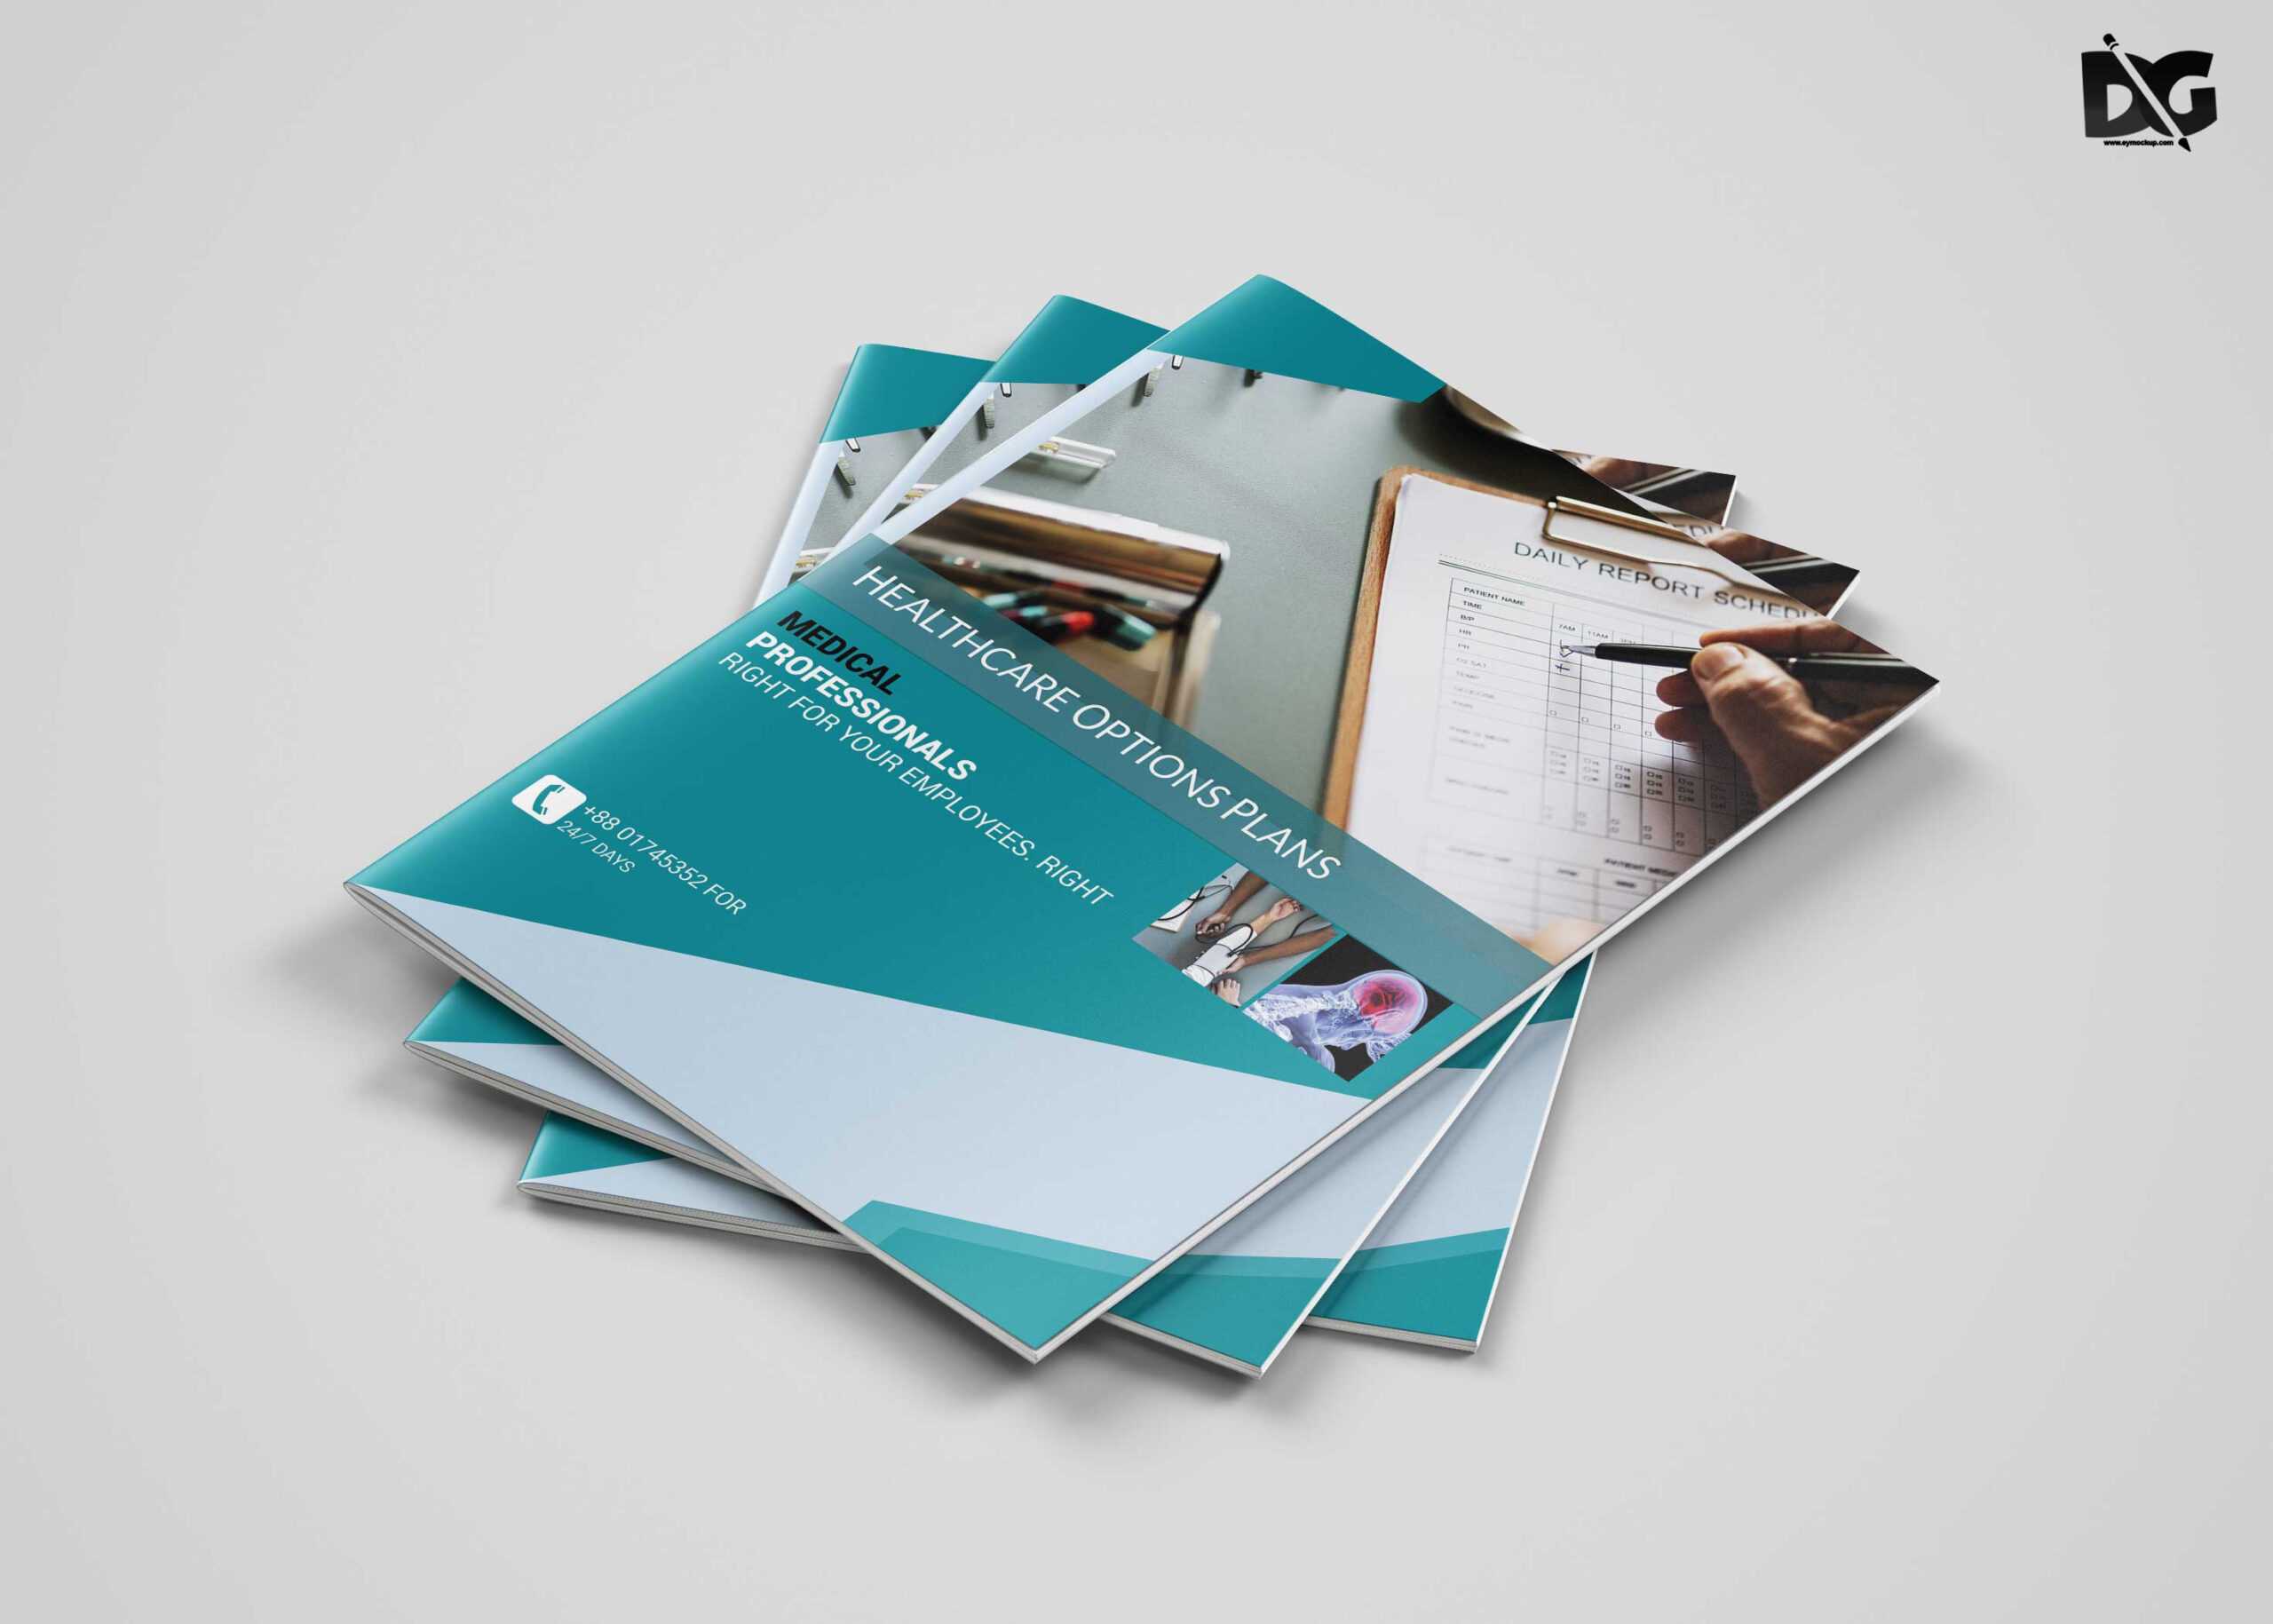 Free Download Health Care A4 Brochure Template | Free Psd Mockup Pertaining To Healthcare Brochure Templates Free Download